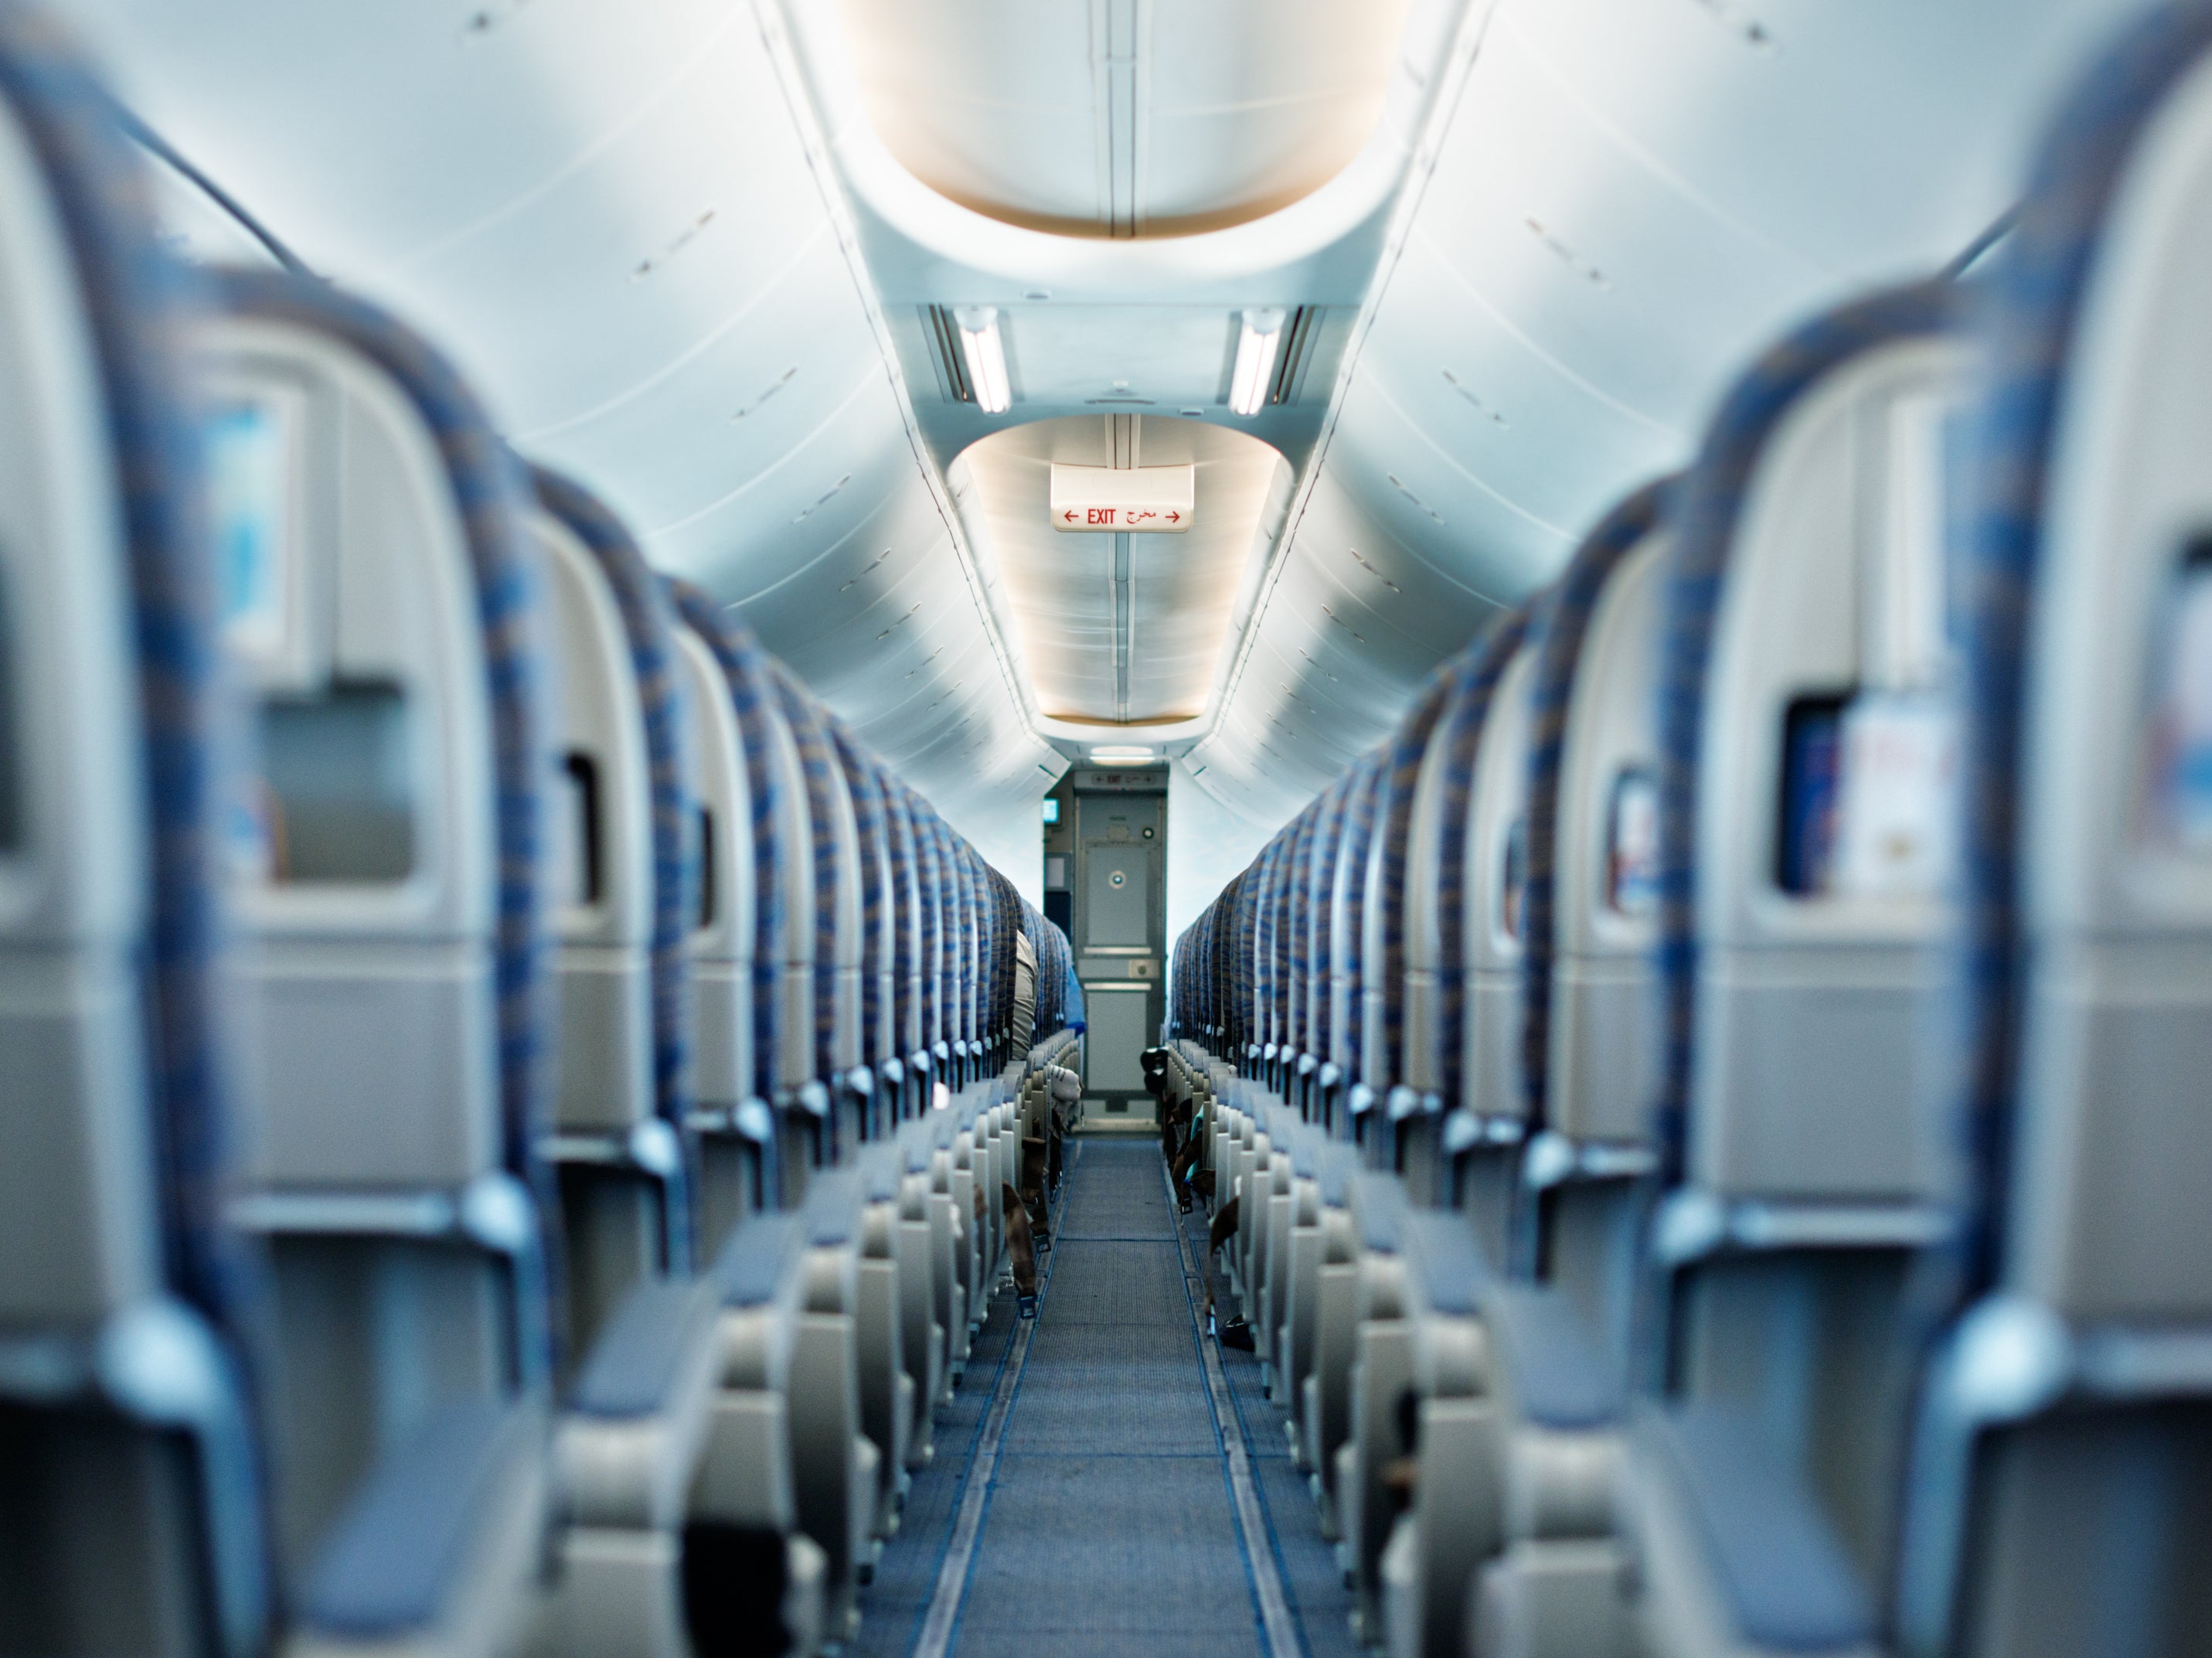 Experts share tips on best plane seats to avoid turbulence